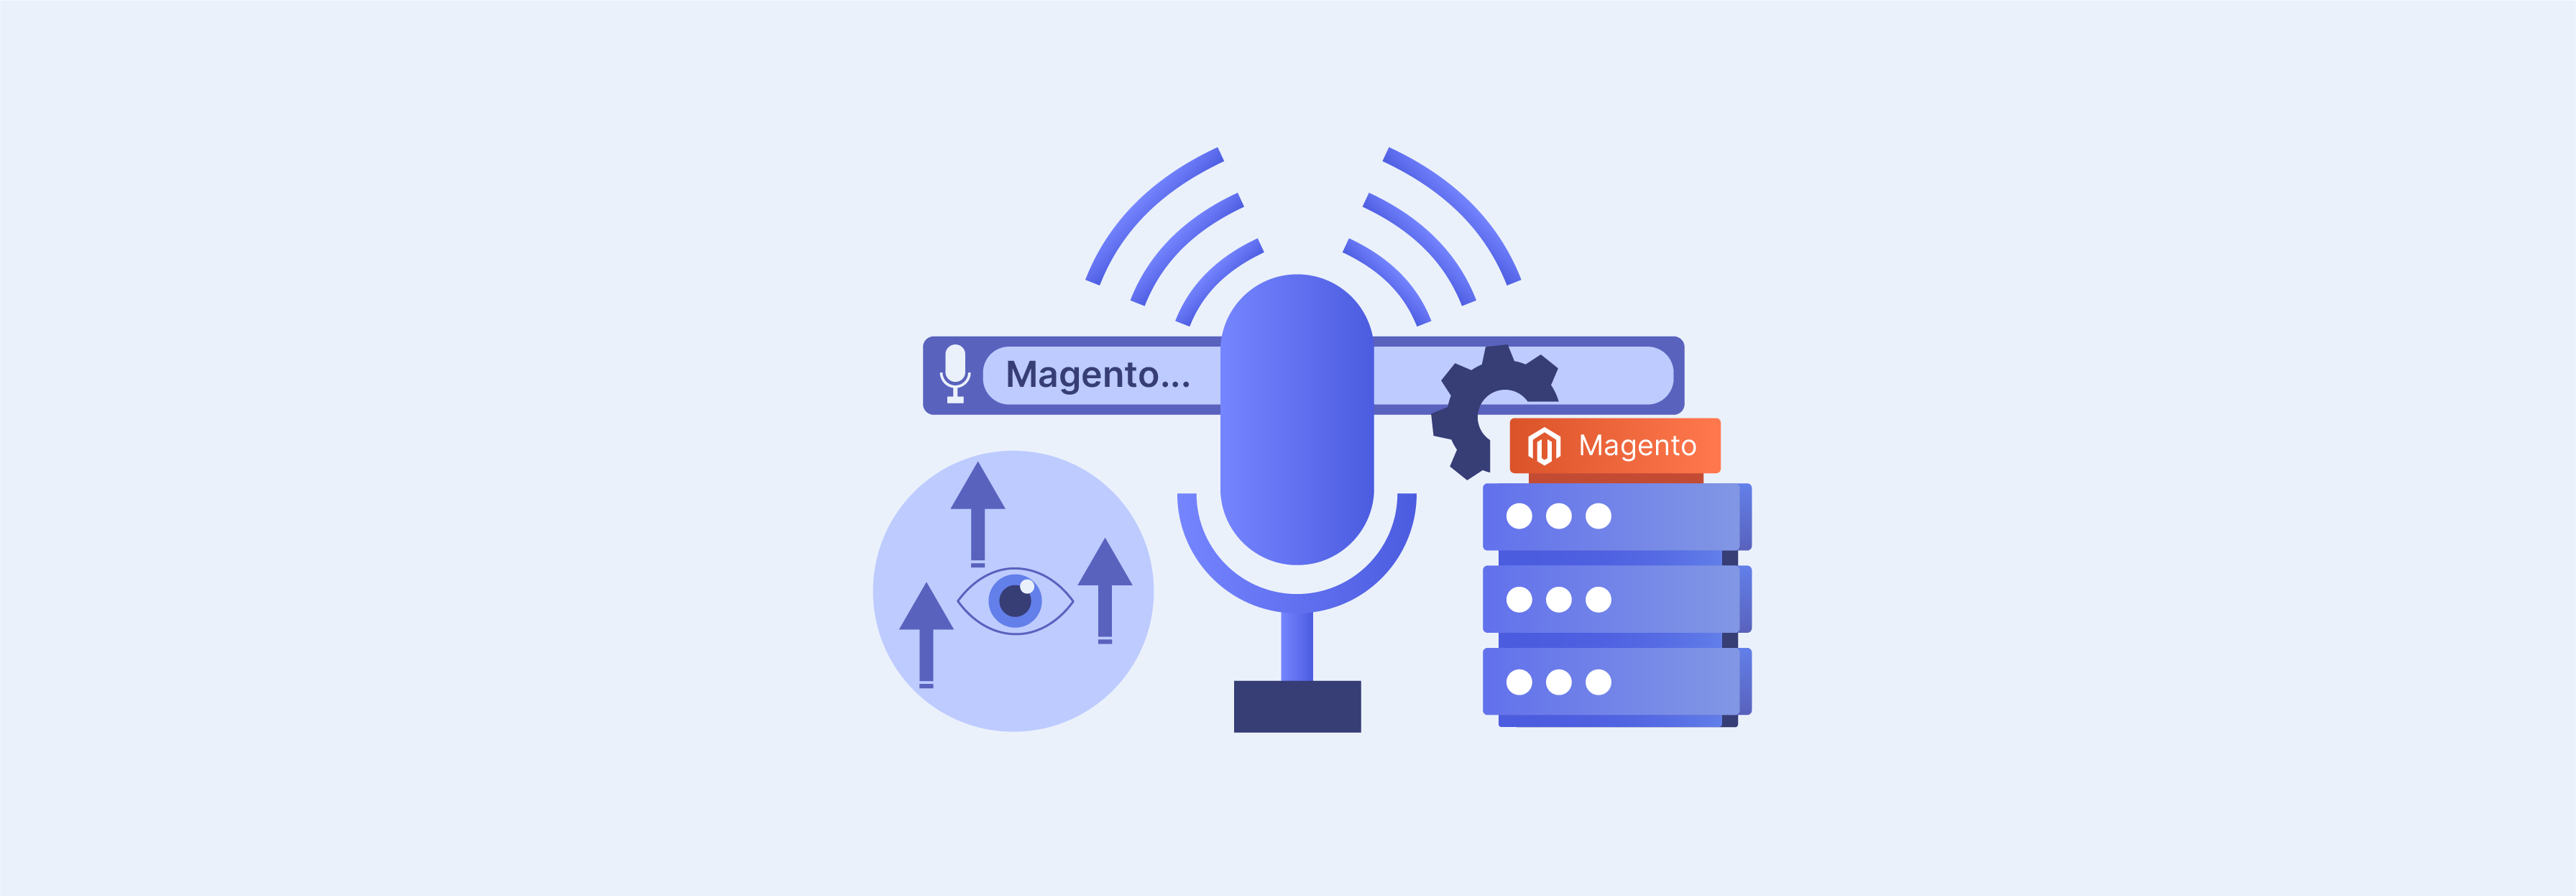 Optimizing Magento stores for voice search to improve user experience in Italy